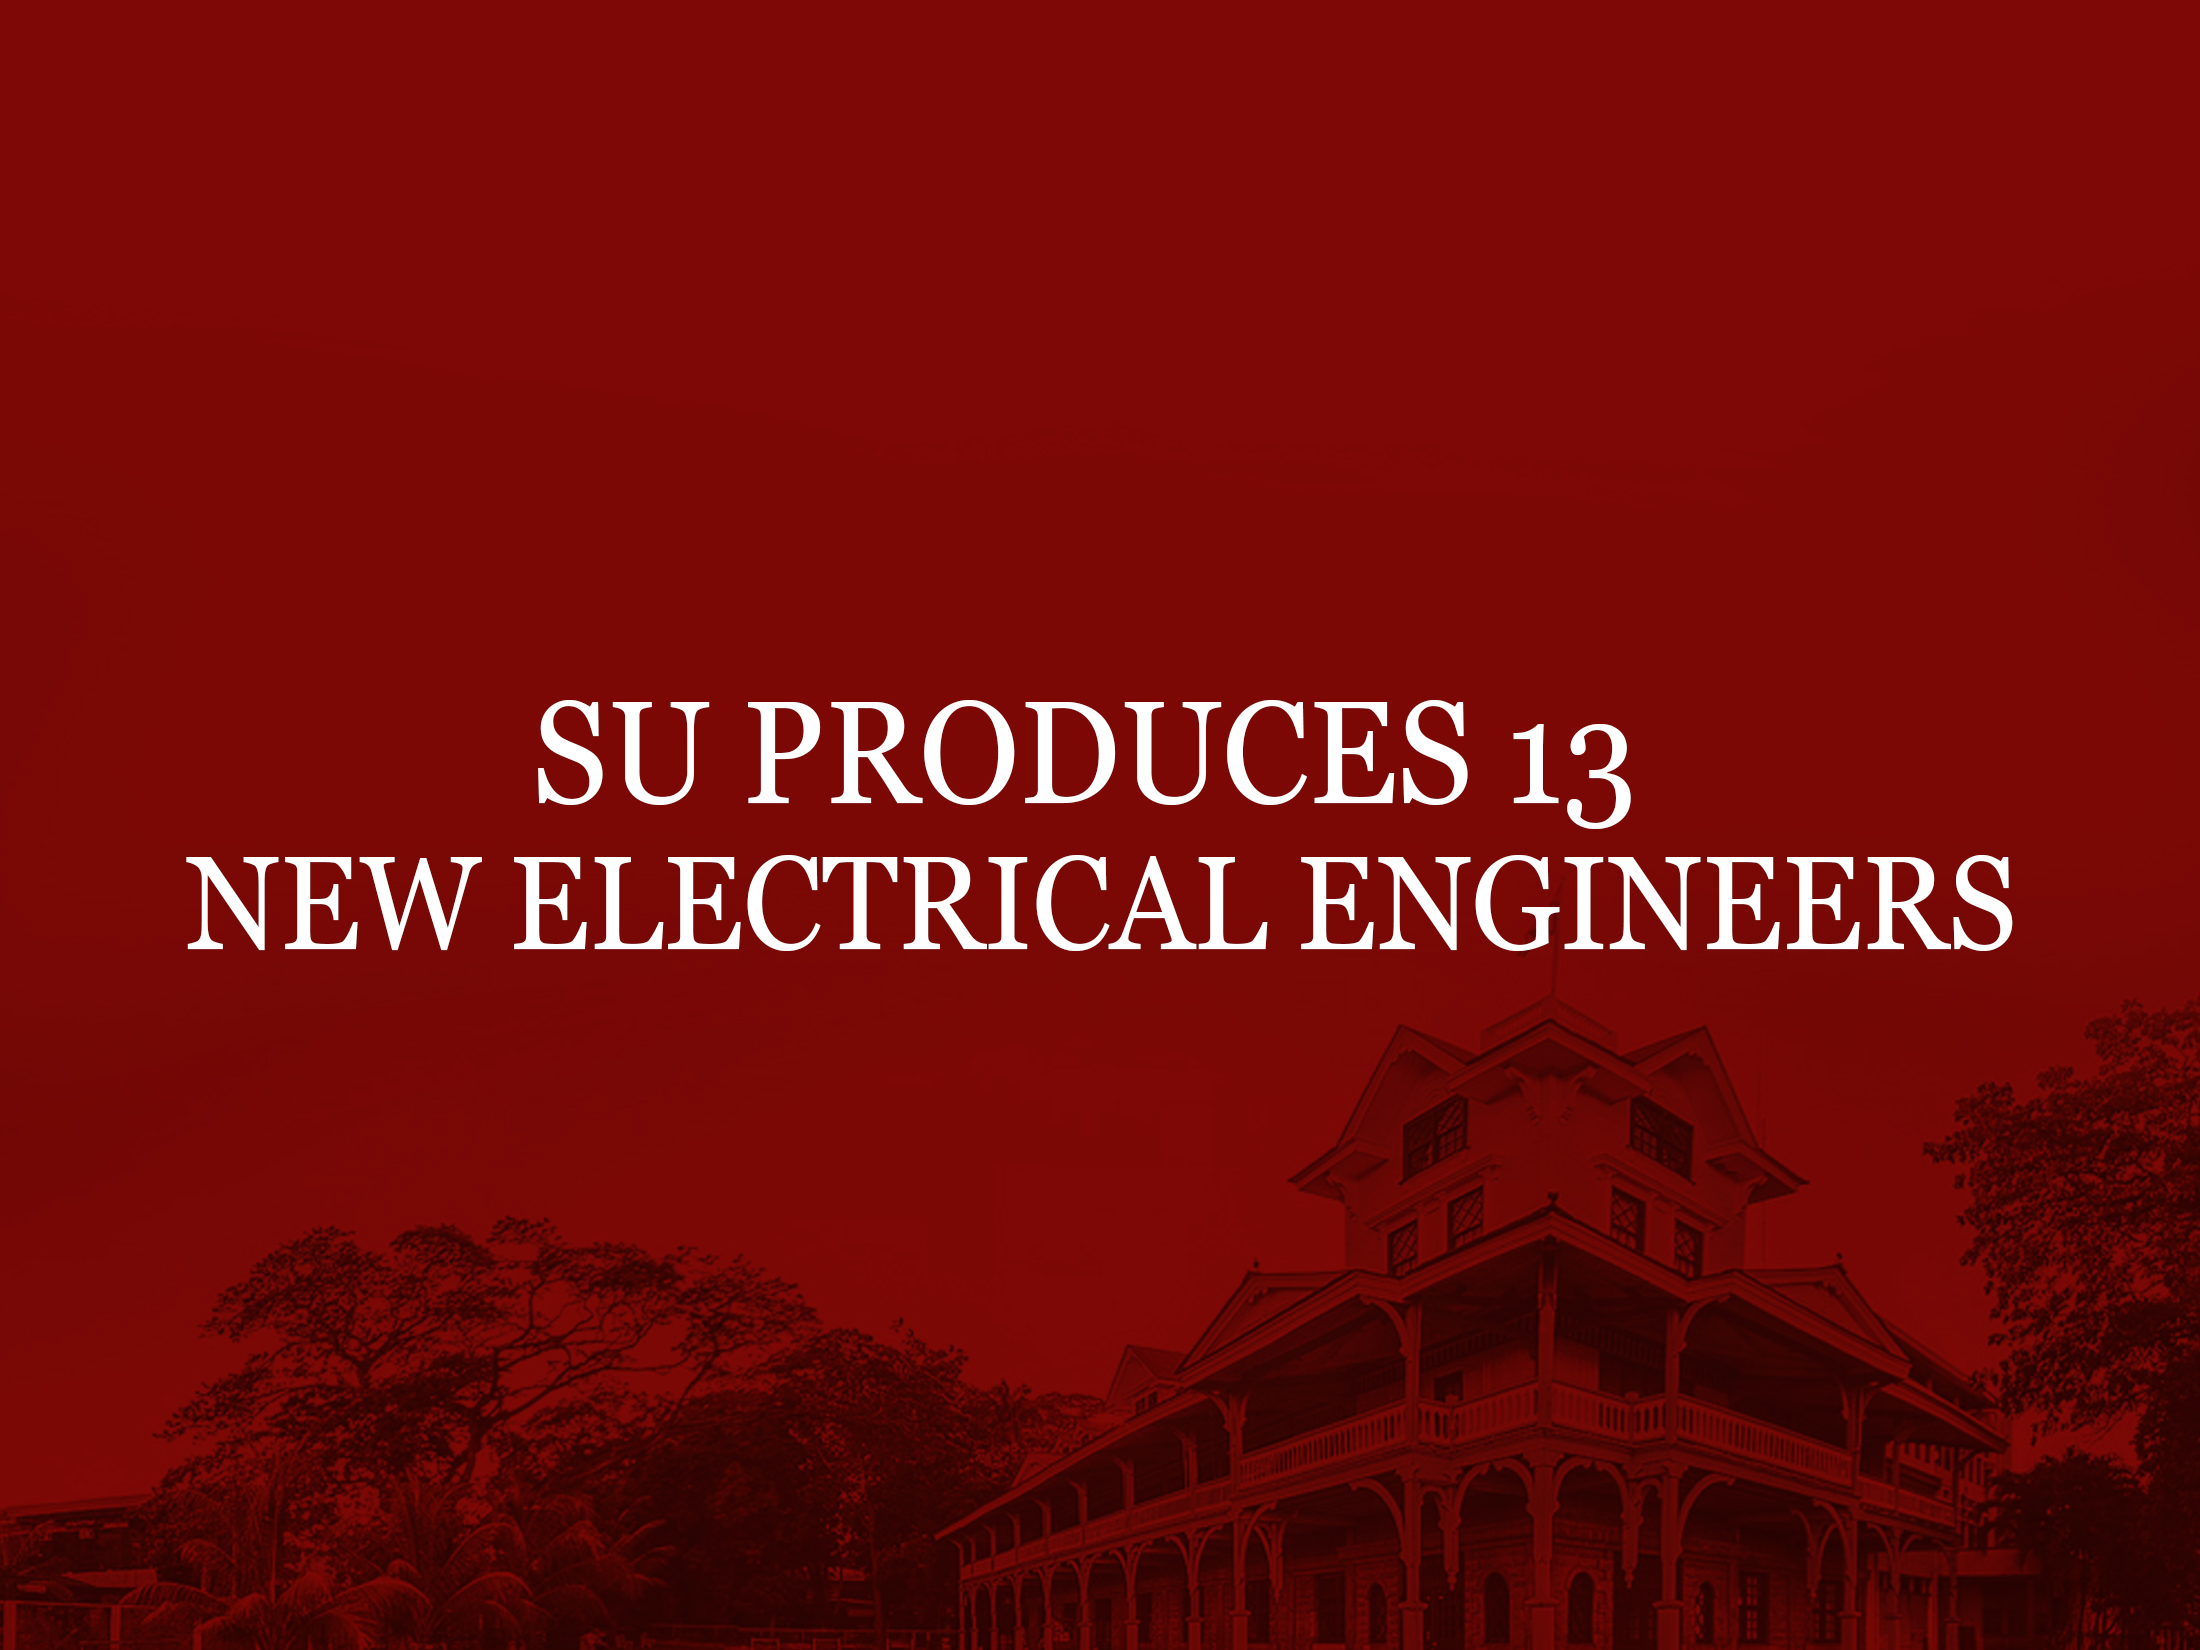 SU produces 13 new electrical engineers